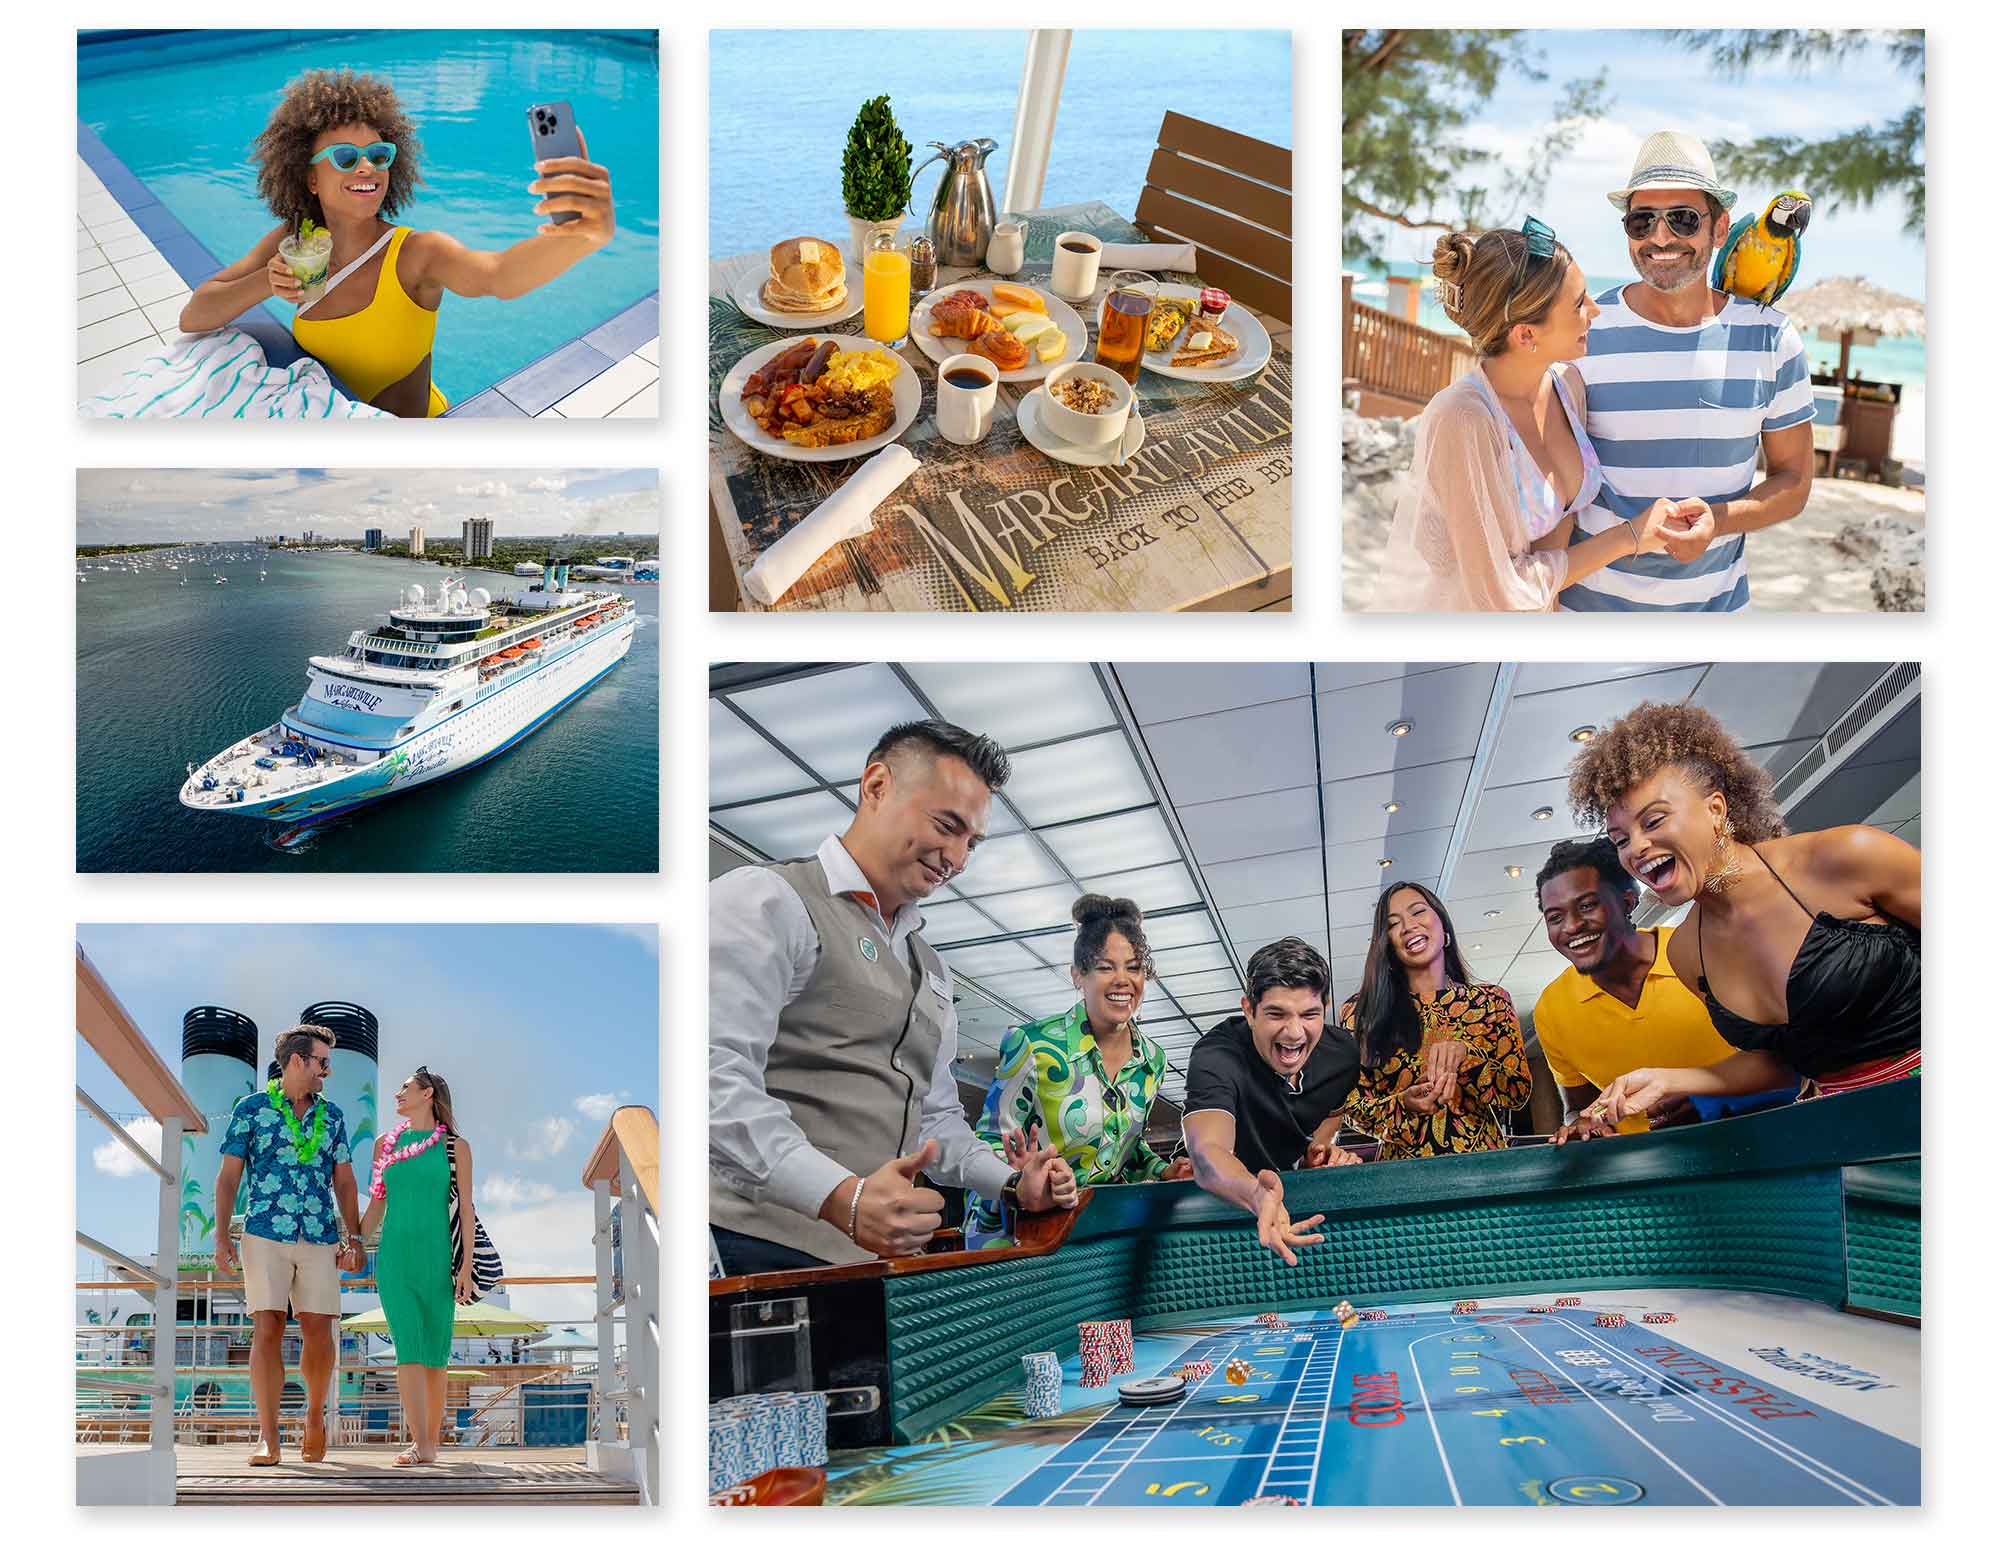 various images from the Margaritaville at Sea photoshoot